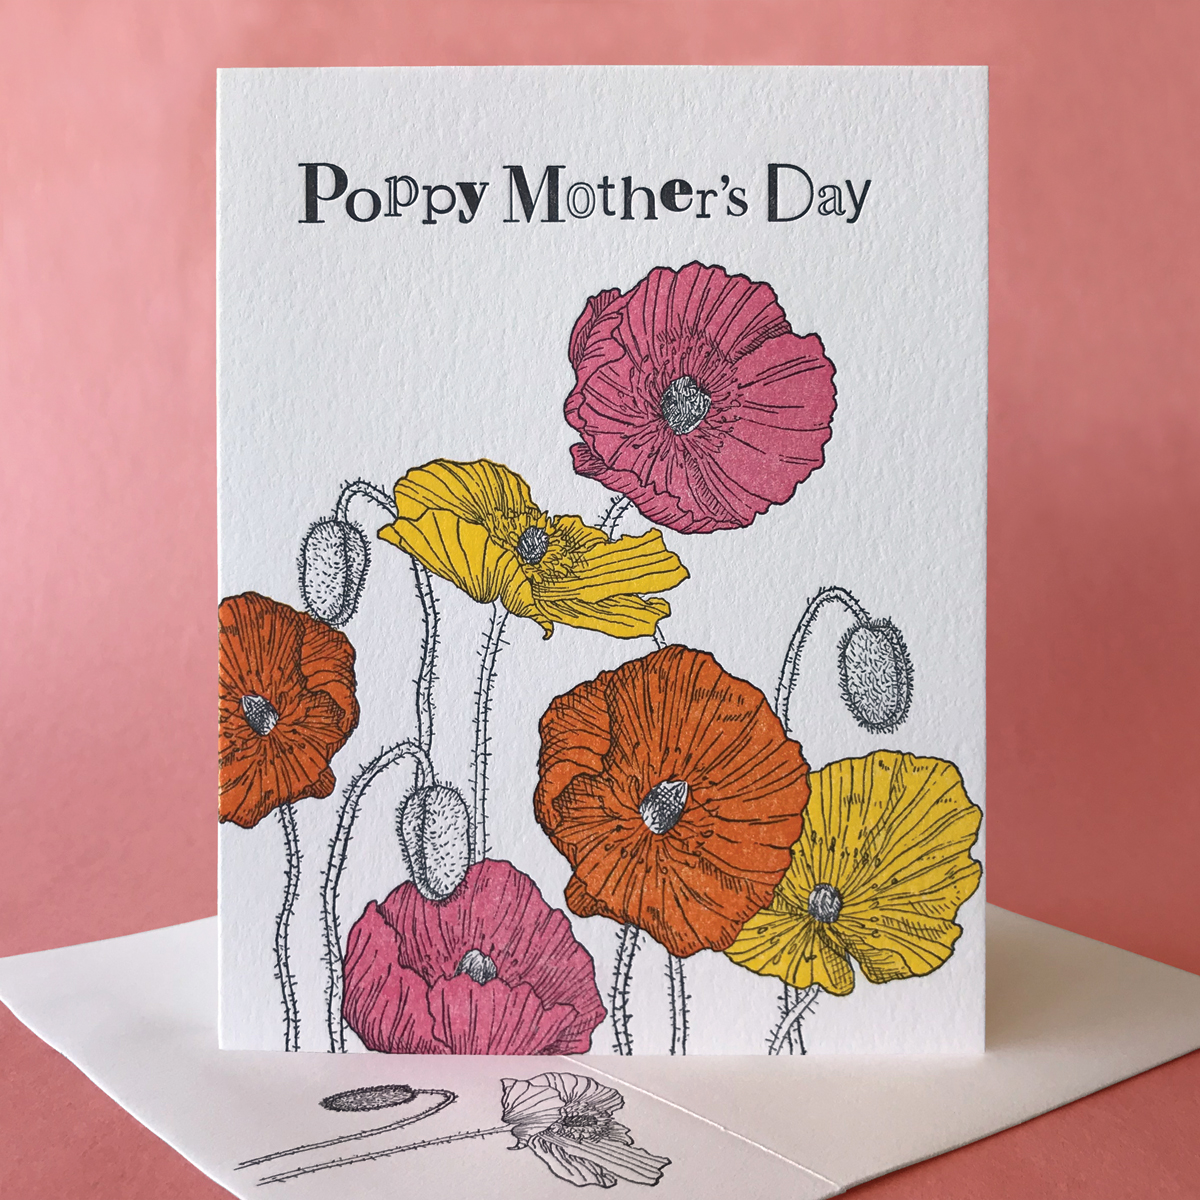 Icelandic Poppy Mother's Day by Painted Tongue Press